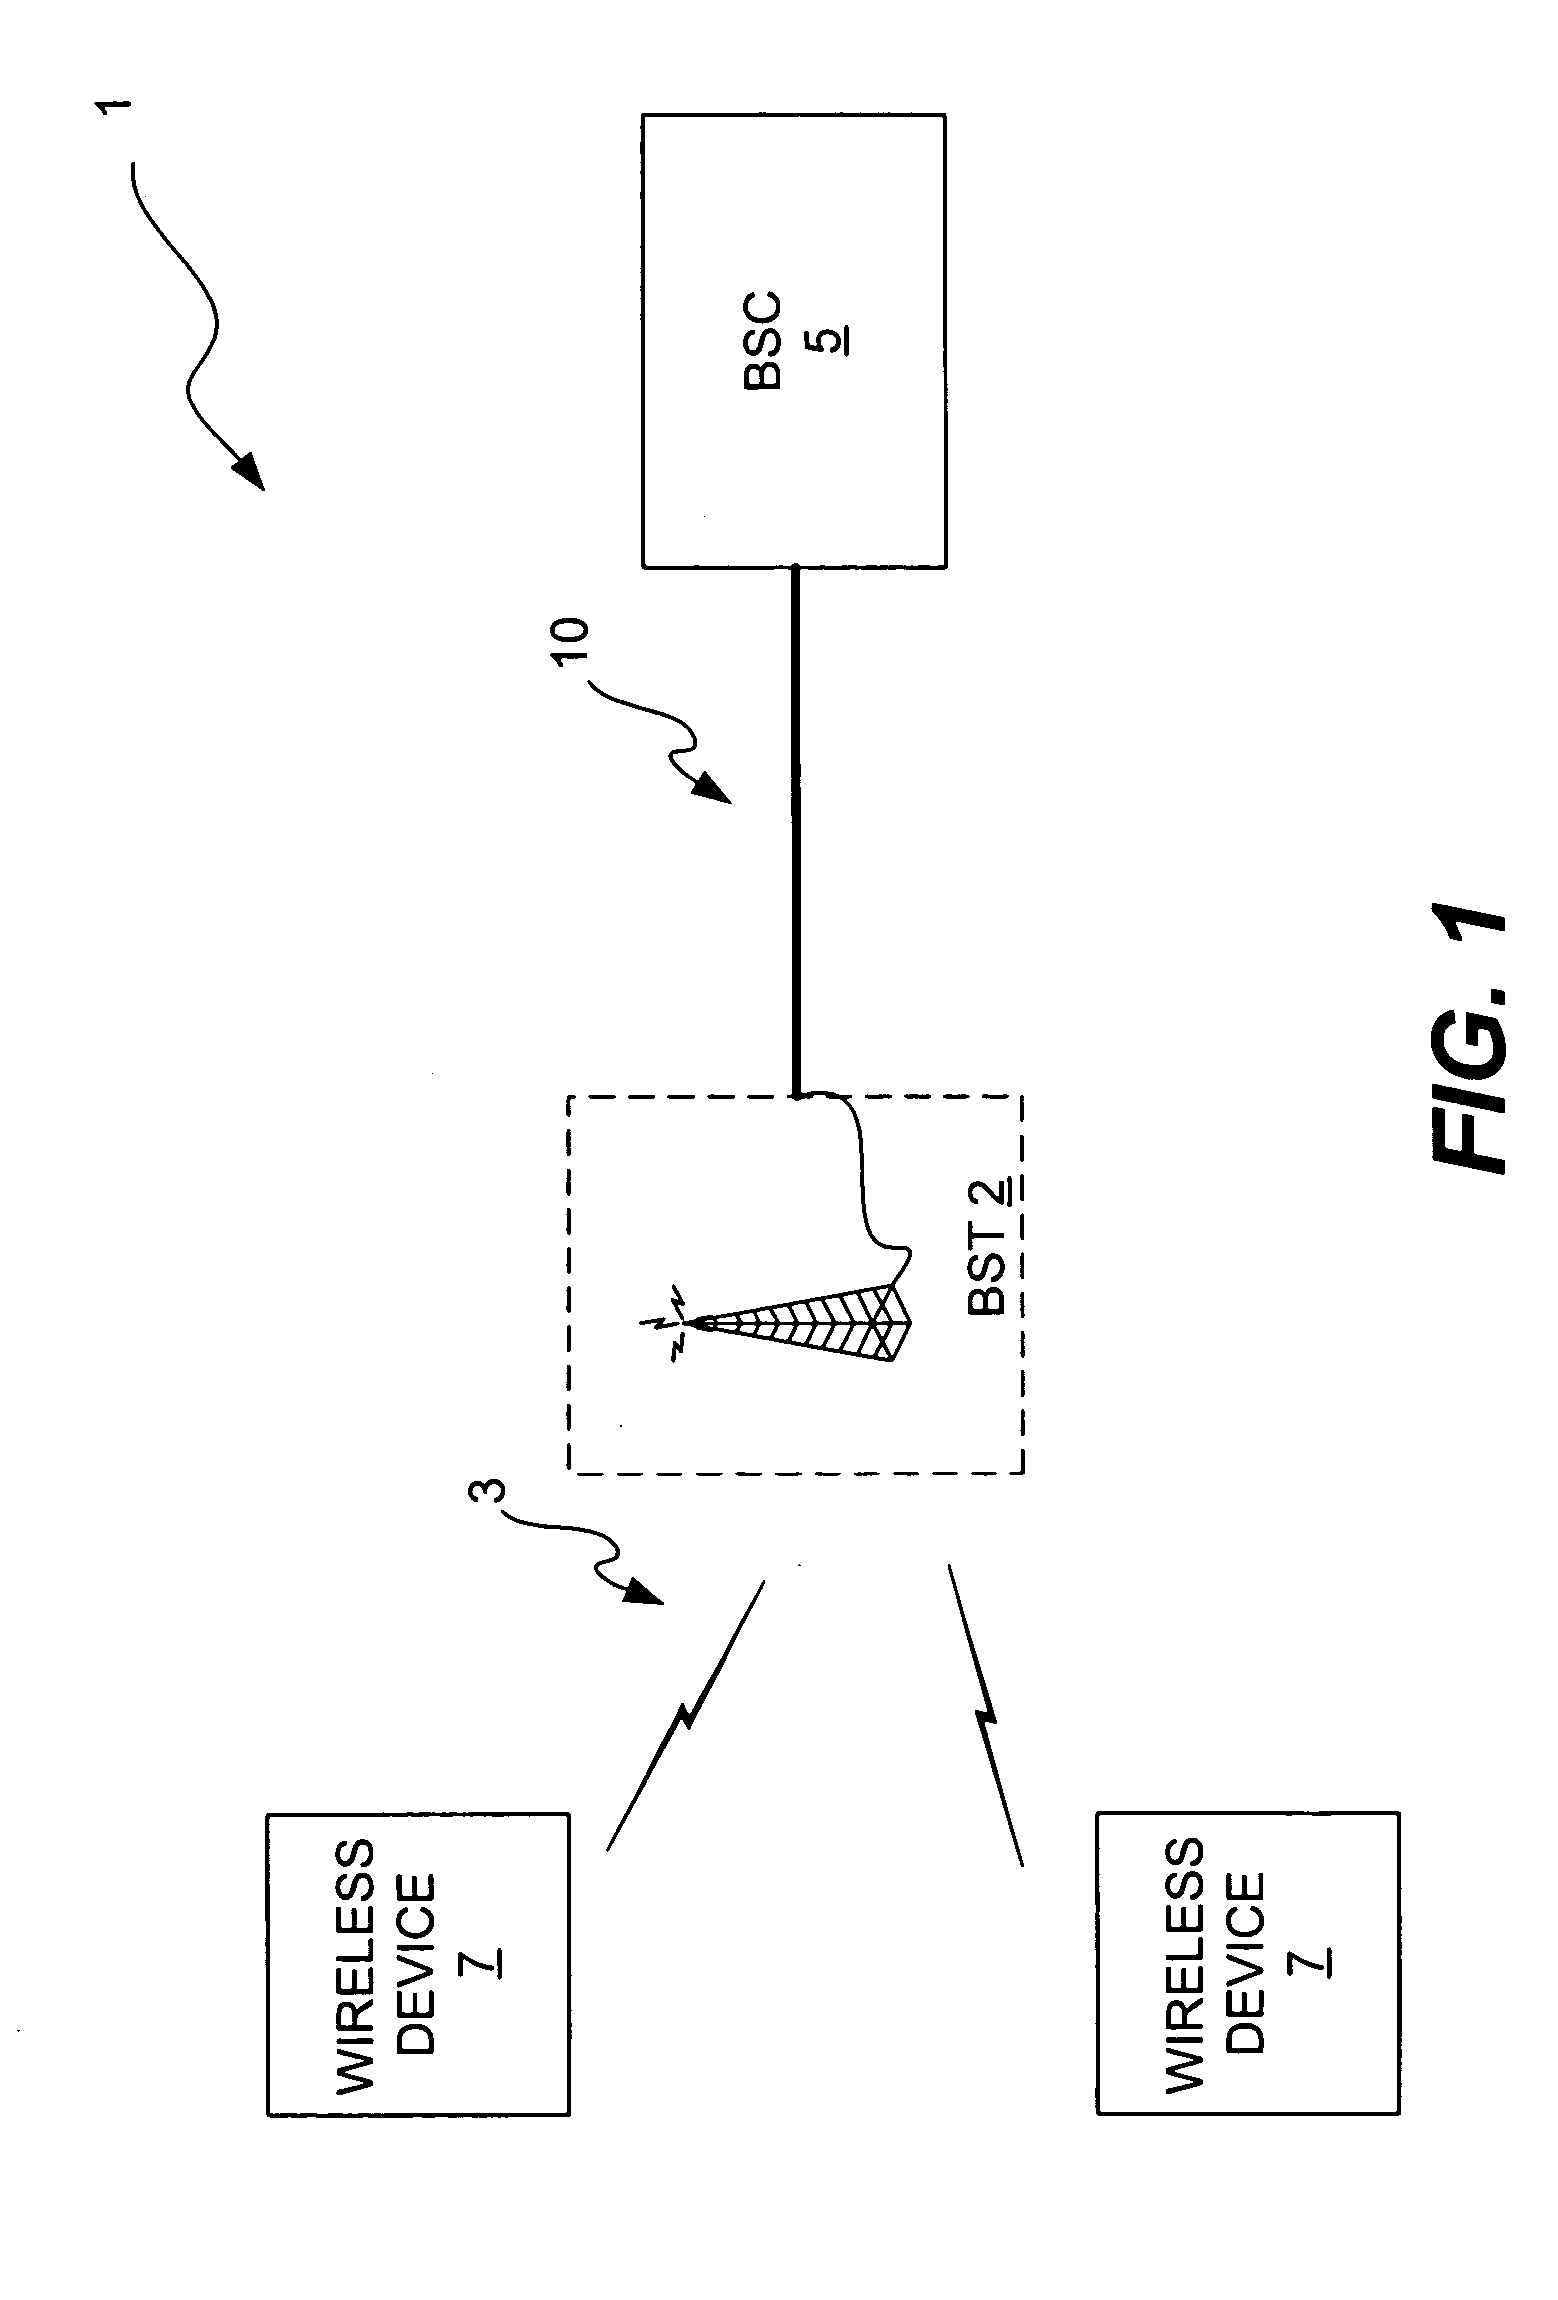 Method and apparatus for use in provisioning resources for a backhaul link